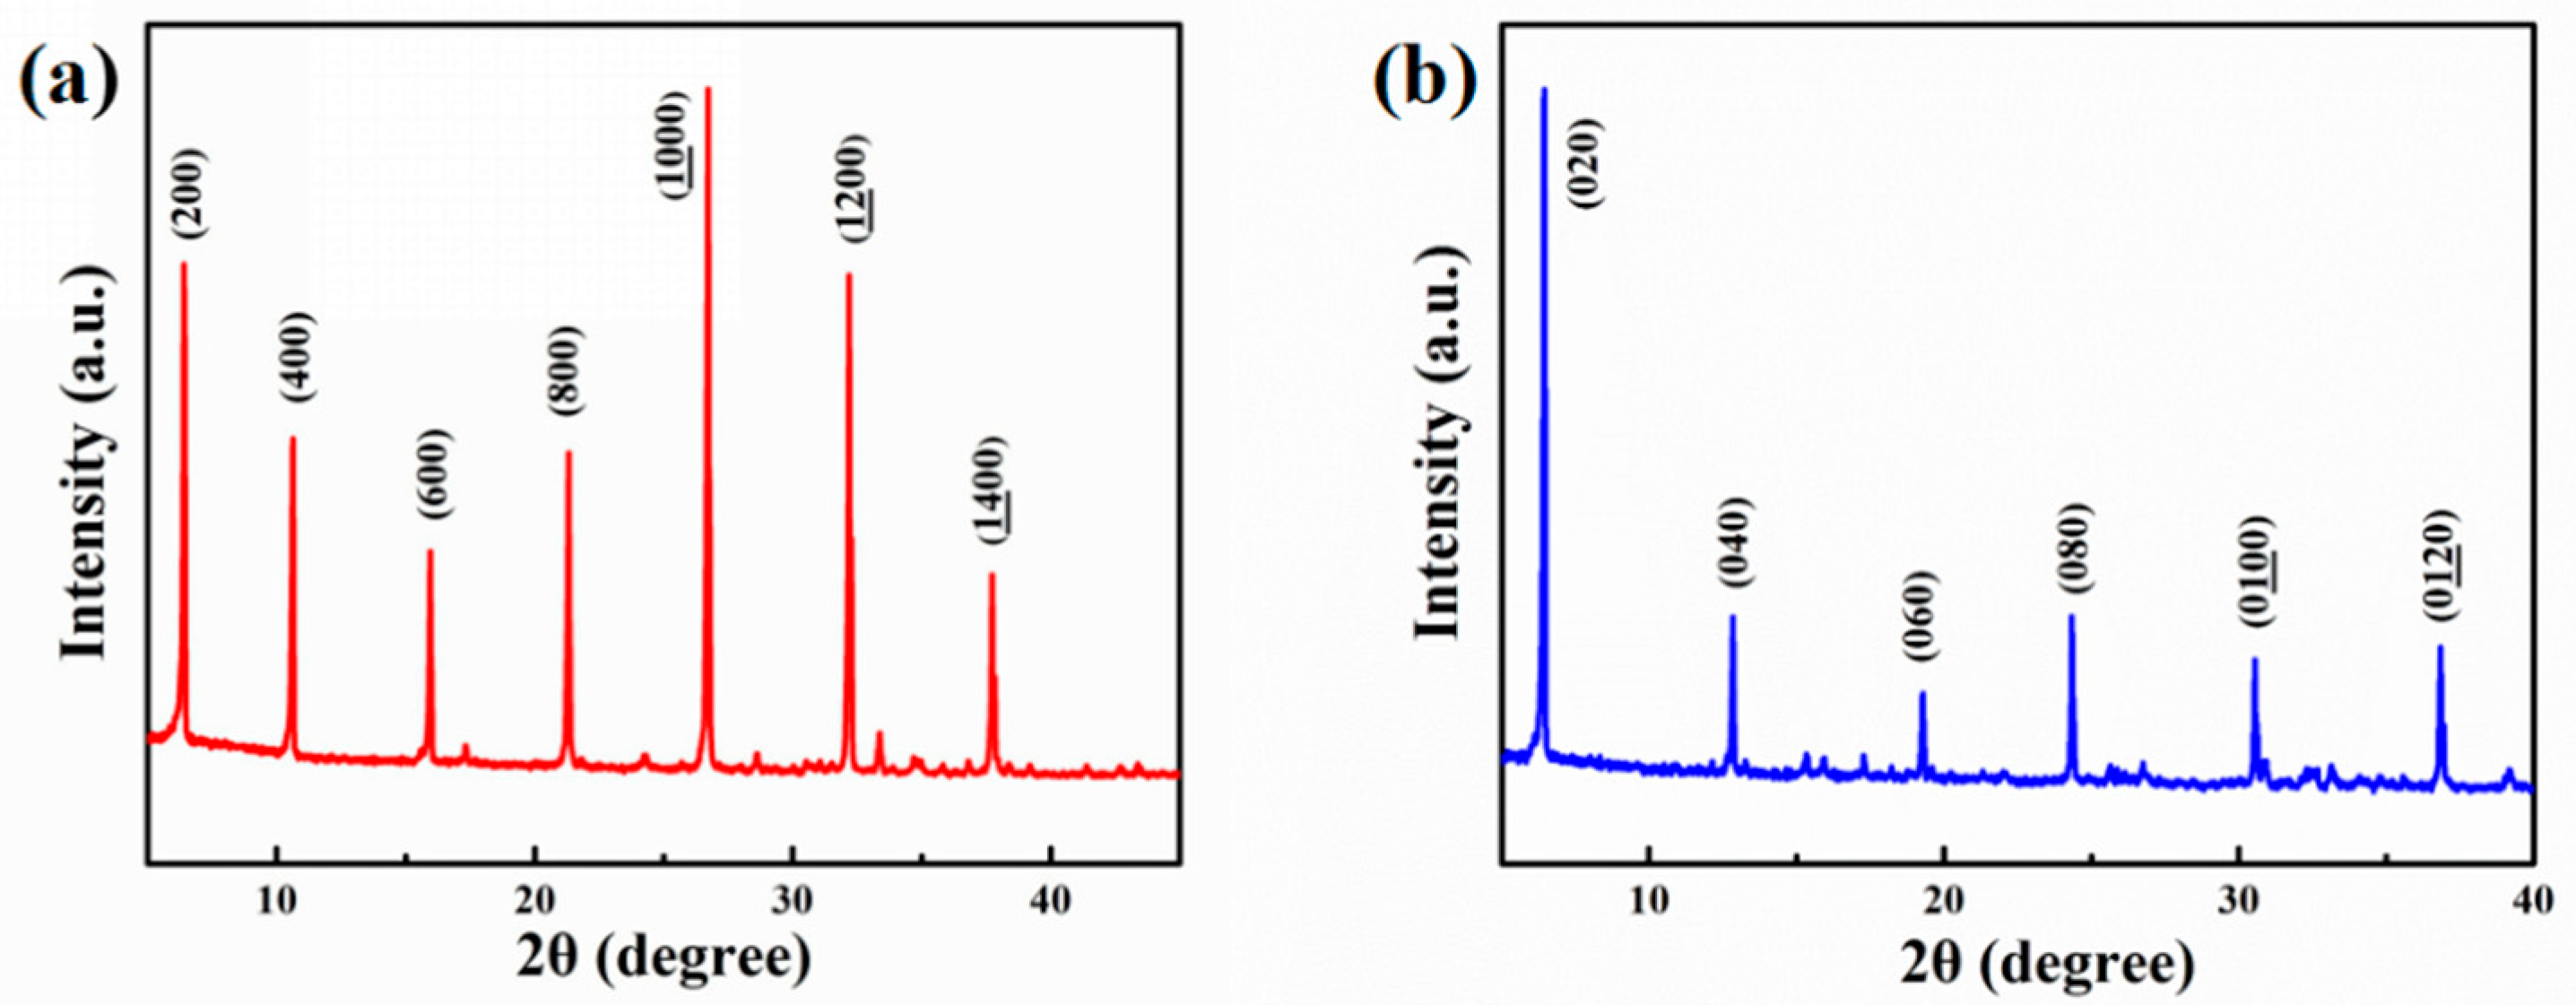 Applied Sciences Free Full Text Preparation And Two Photon Photoluminescence Properties Of Organic Inorganic Hybrid Perovskites C6h5ch2nh3 2pbbr4 And C6h5ch2nh3 2pbi4 Html